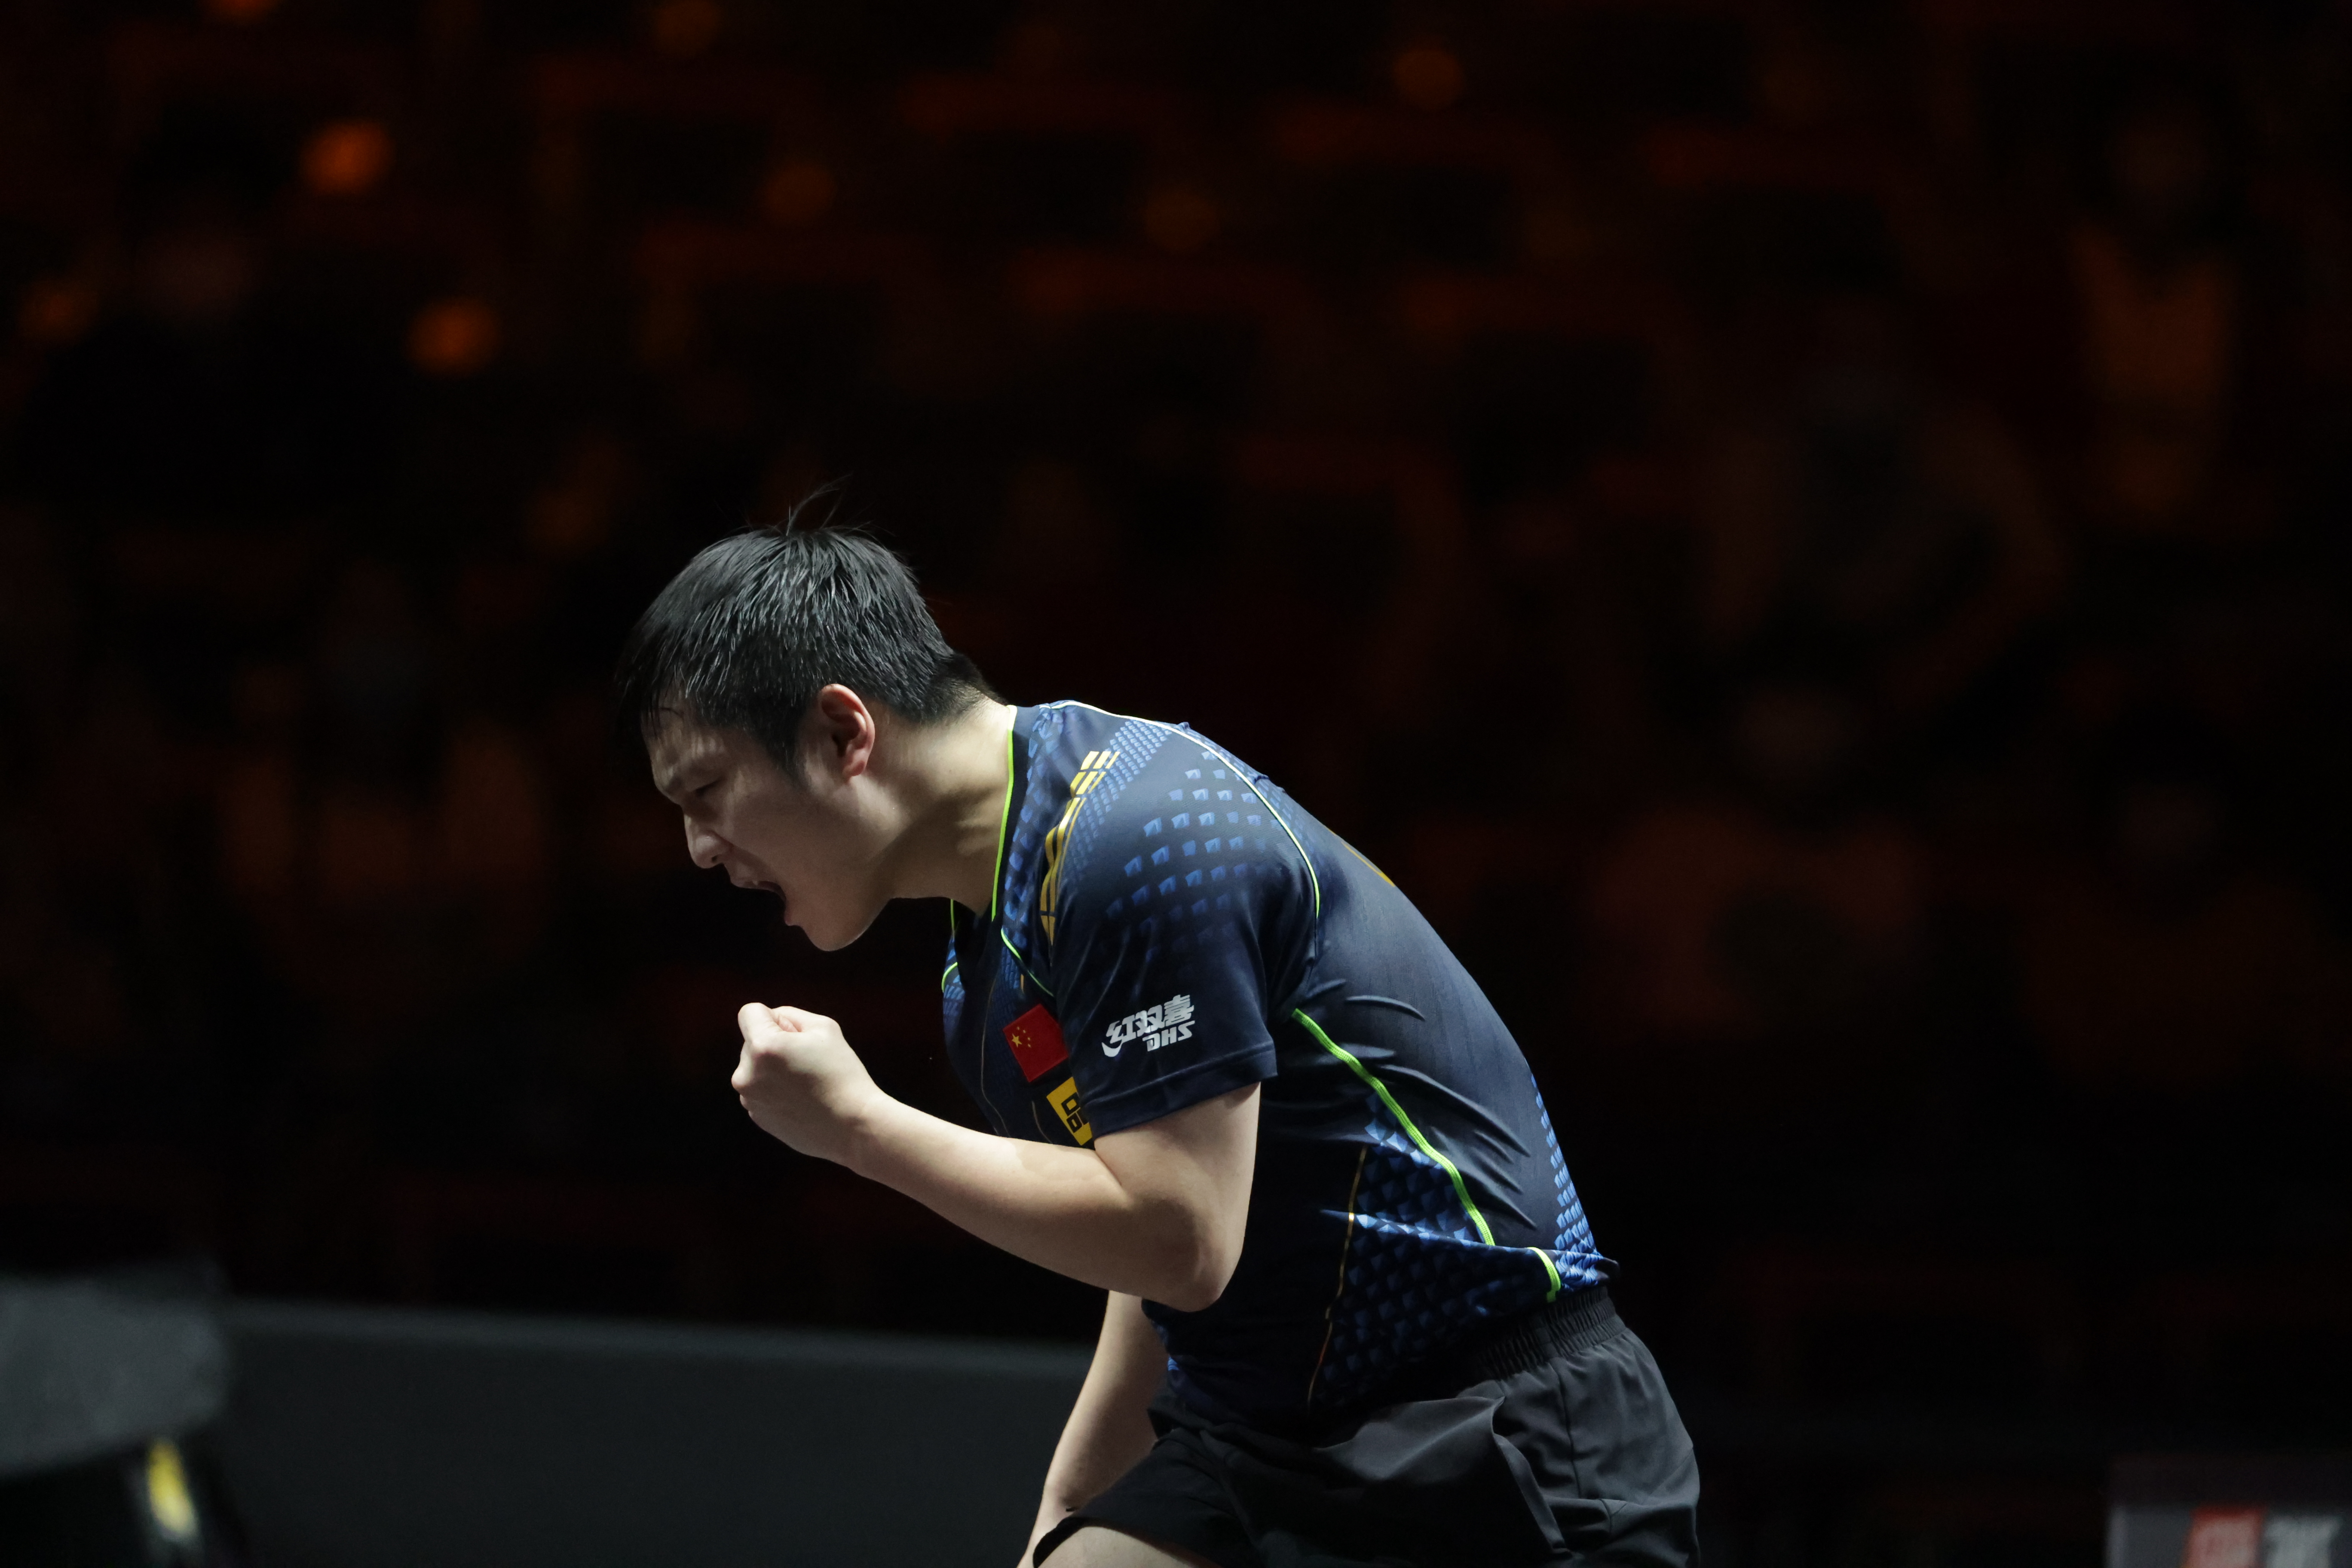 World Champion Fan Zhendong sets up grand finale against Tomokazu Harimoto, in WTT Cup Finals in Singapore!